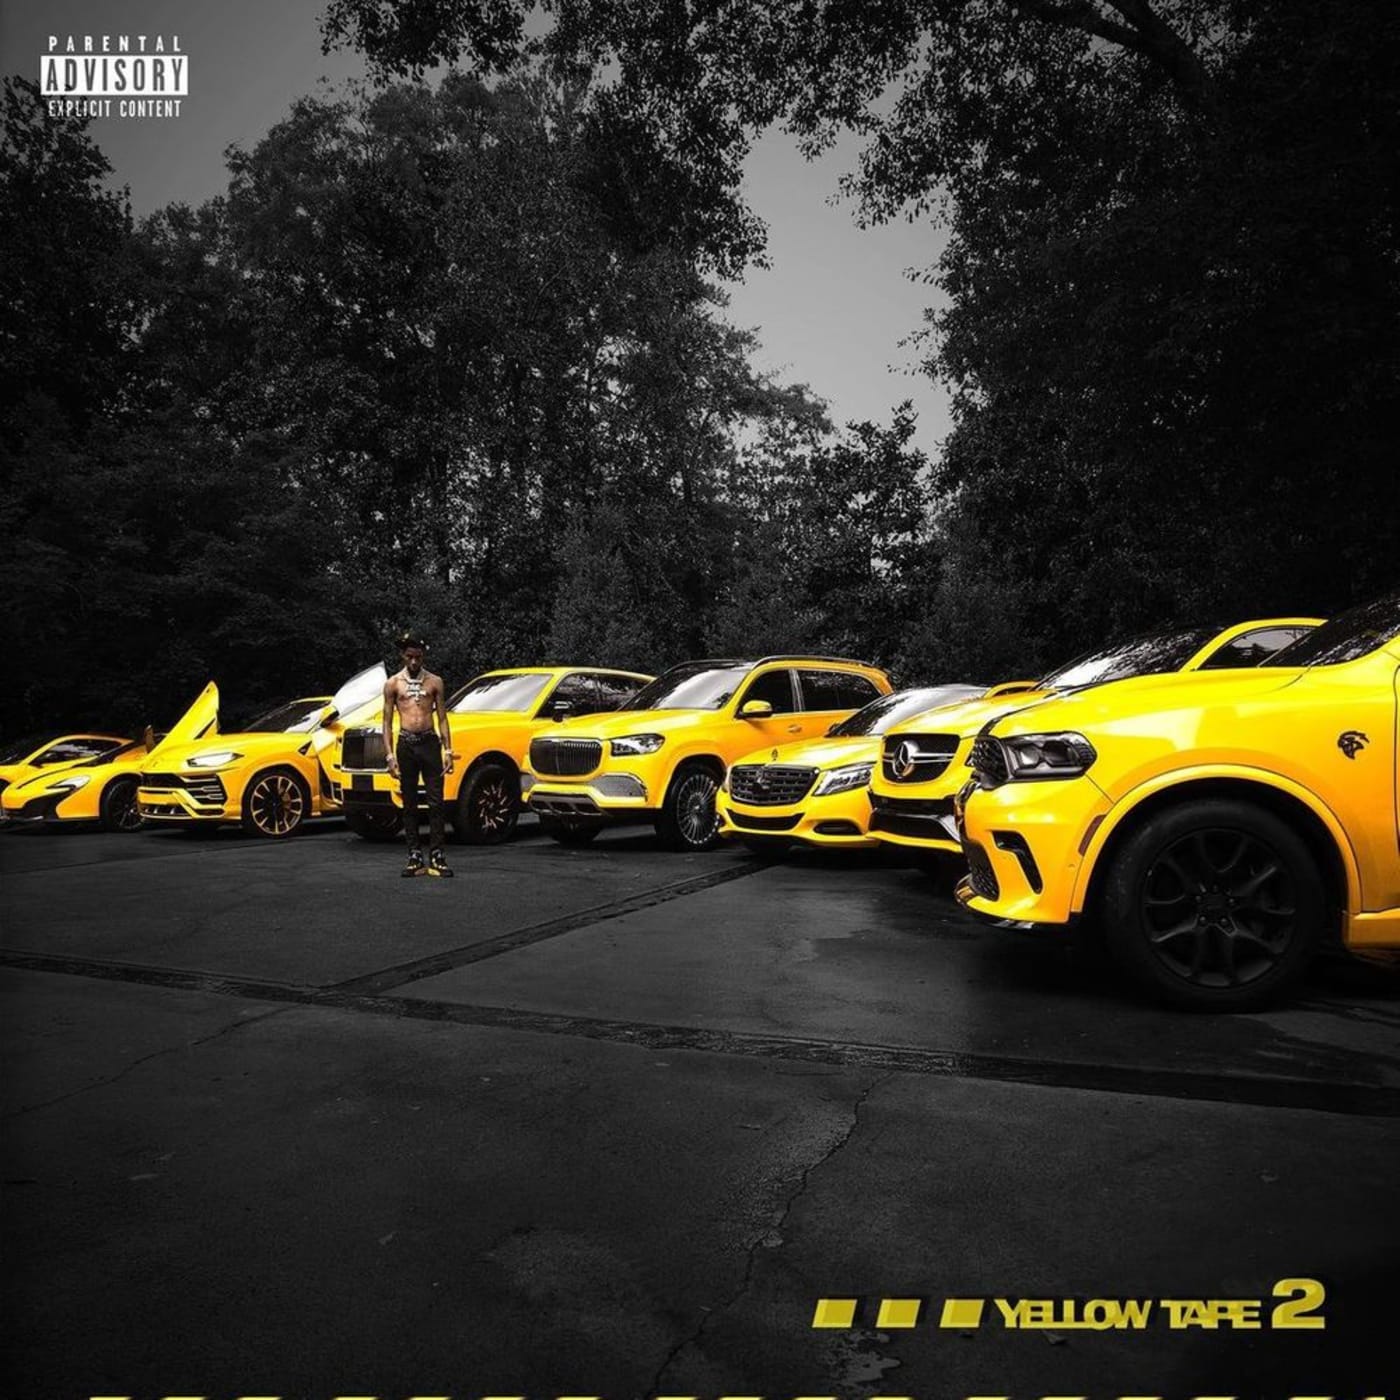 Key Glock cover art for his new album "Yellow Tape 2"